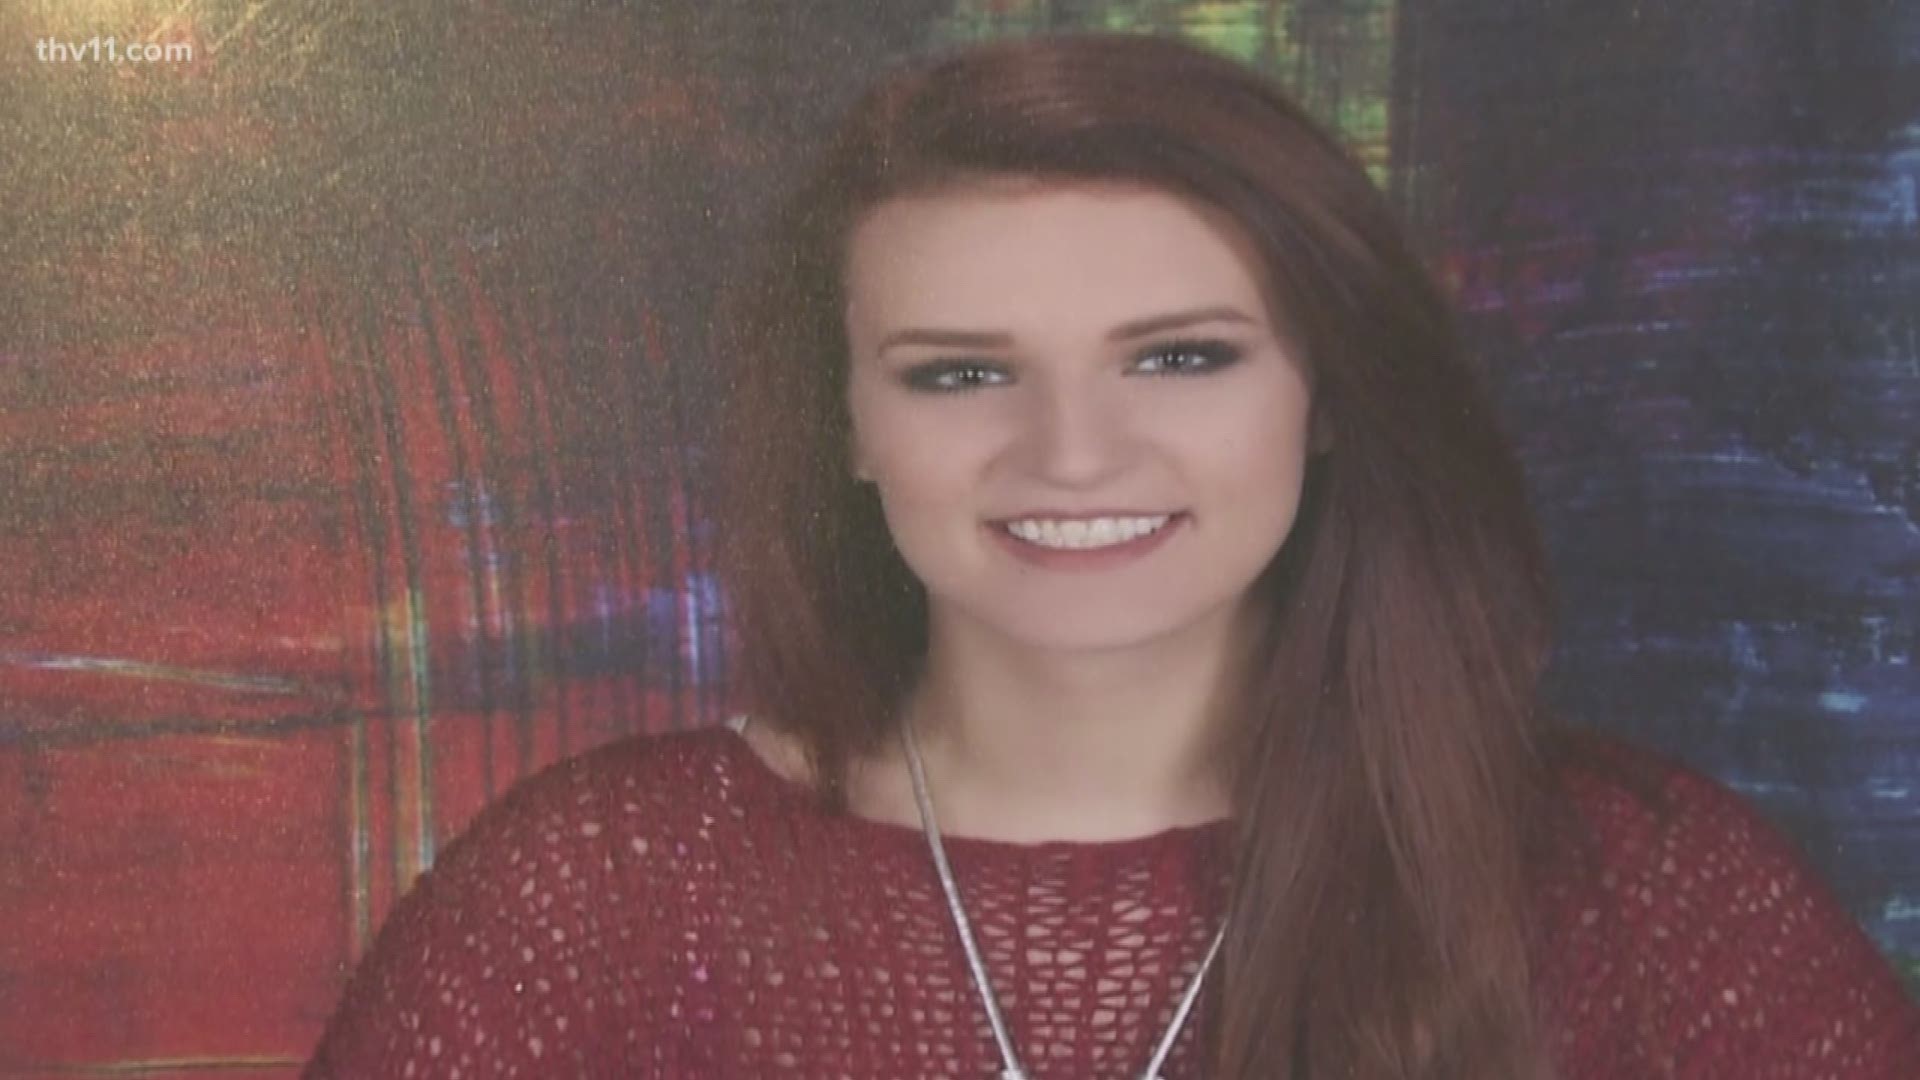 20-year-old Joely Clements received treatment for drug abuse at Rivendell Behavioral Health in Benton. According to the lawsuit, she died just days after her release.